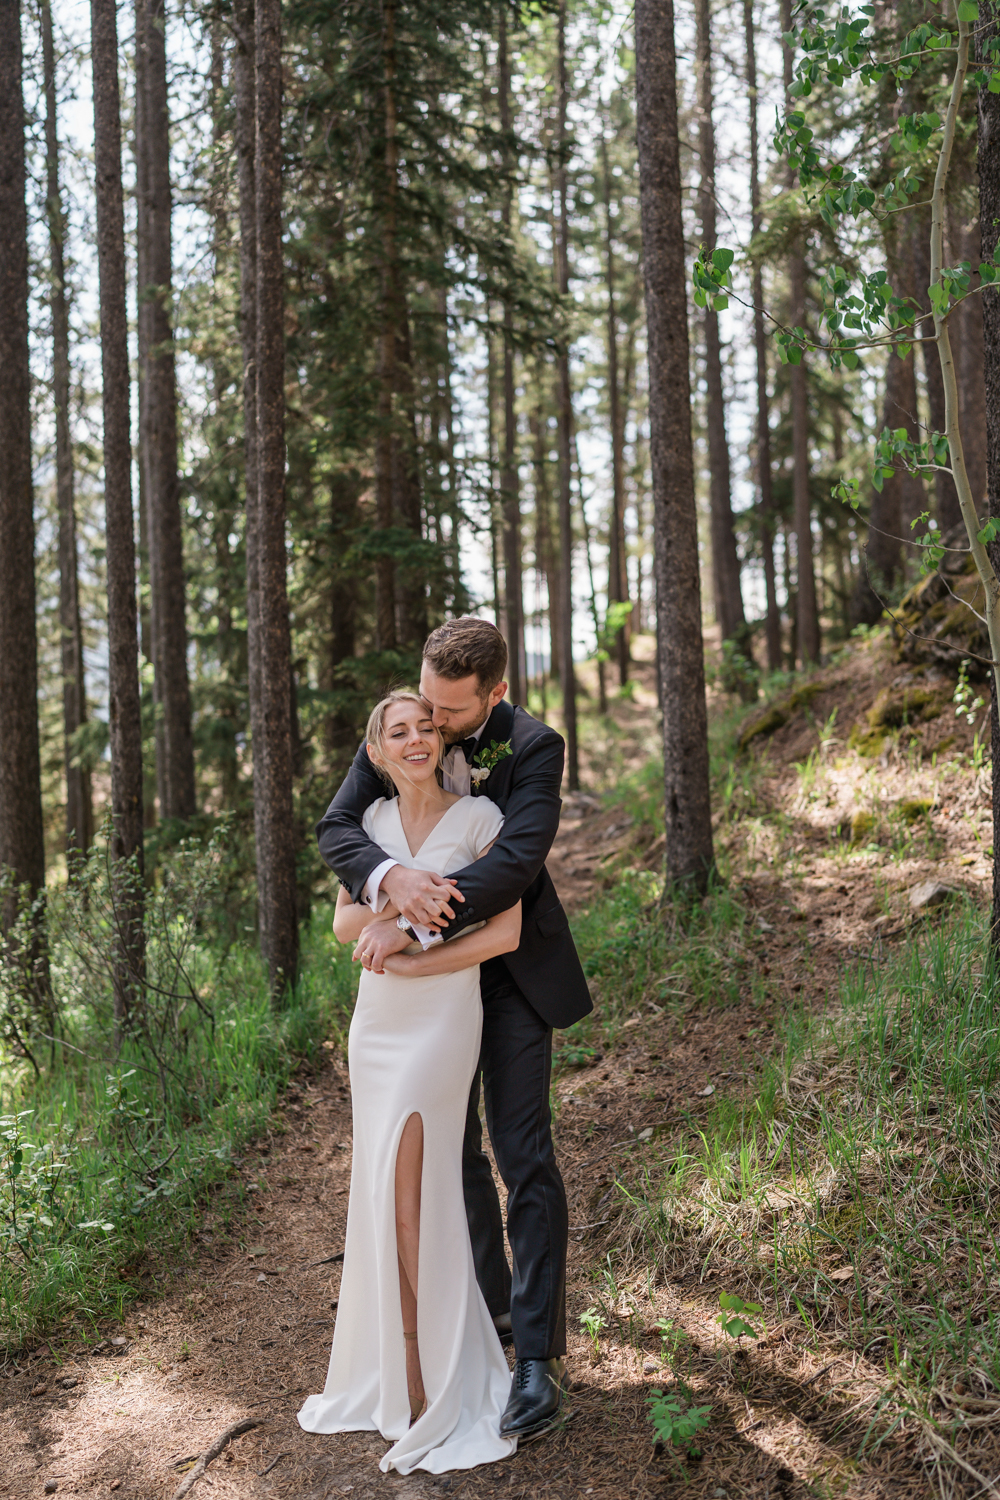 groom embraces bride from behind in the trees at Lake Minnewanka in Banff National Park